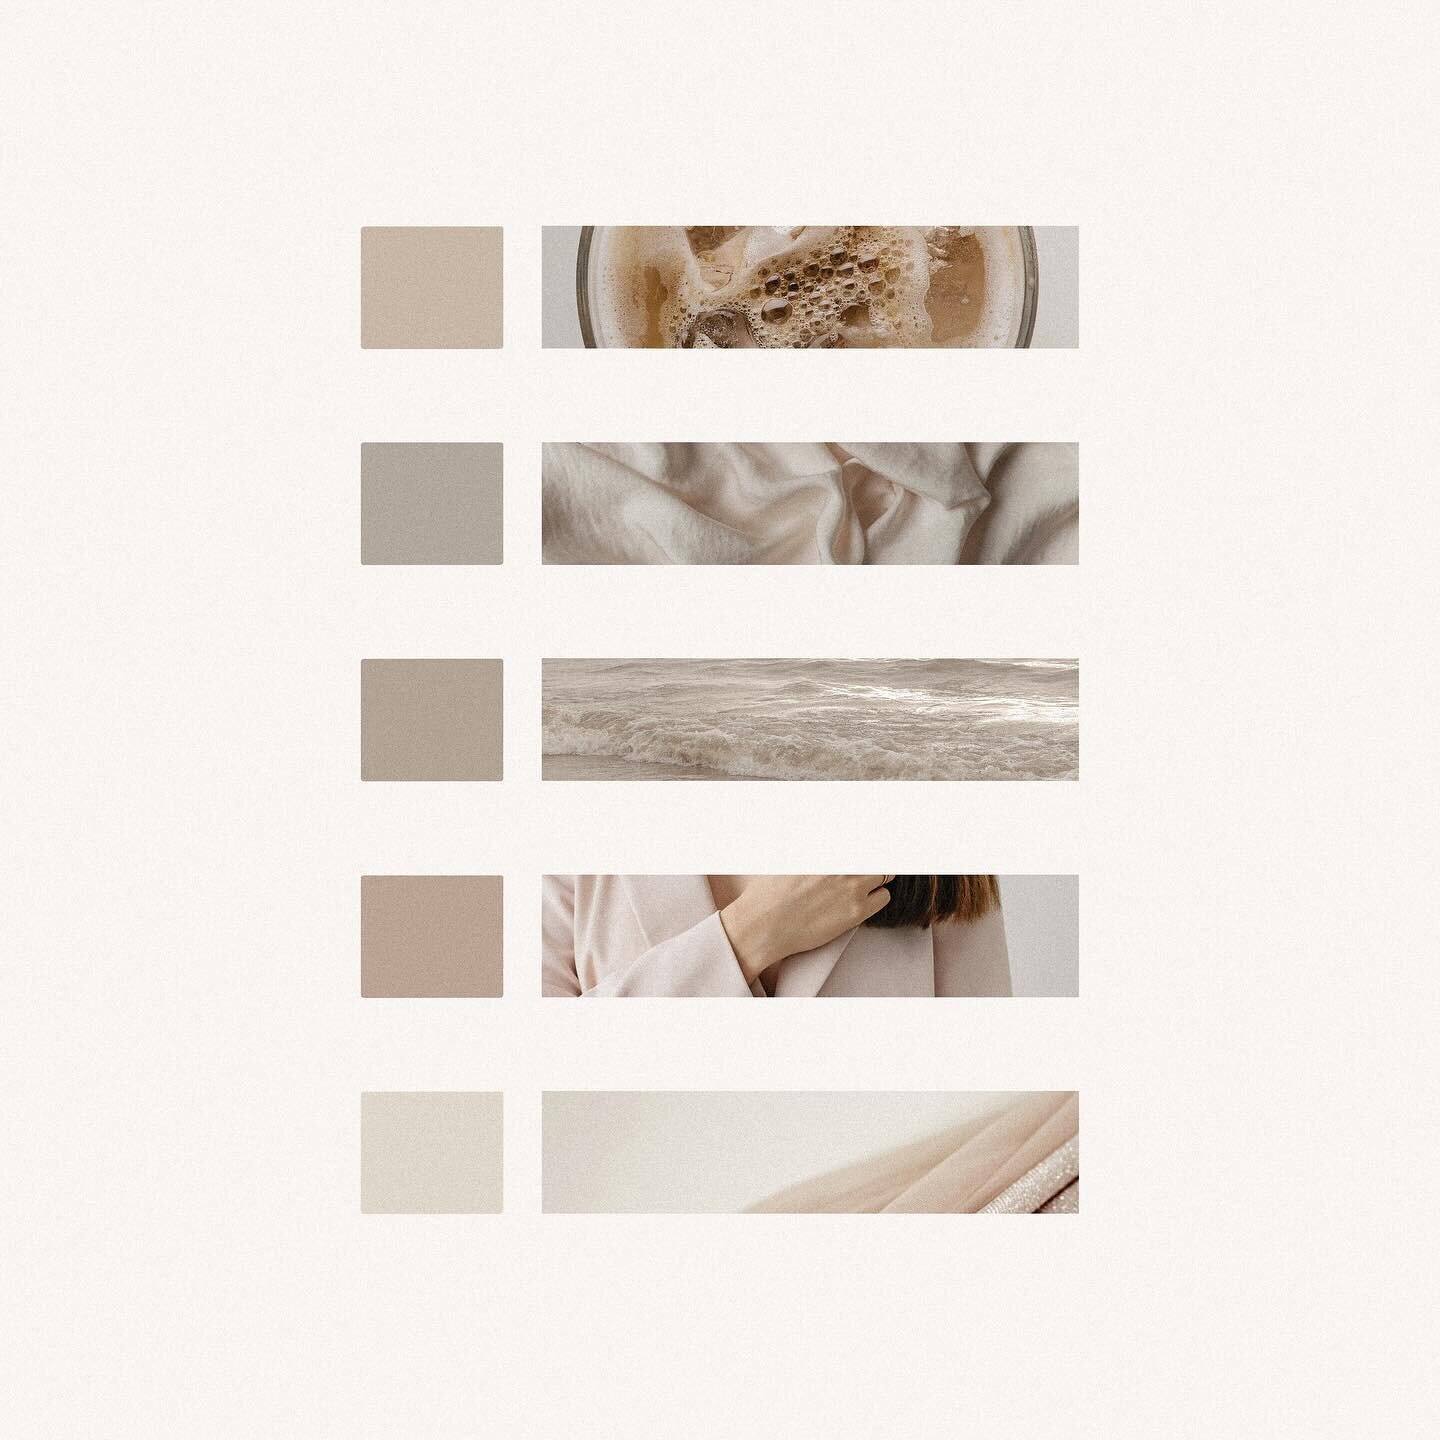 Obsessed with these neutral tones! ✨🤍

Swipe across for the HEX codes so you can use these beautiful beiges.

#qwirki #qwirkiandco #beigeaesthetic #beigeneutrals #neutral #minimalist #branddesigner #designer